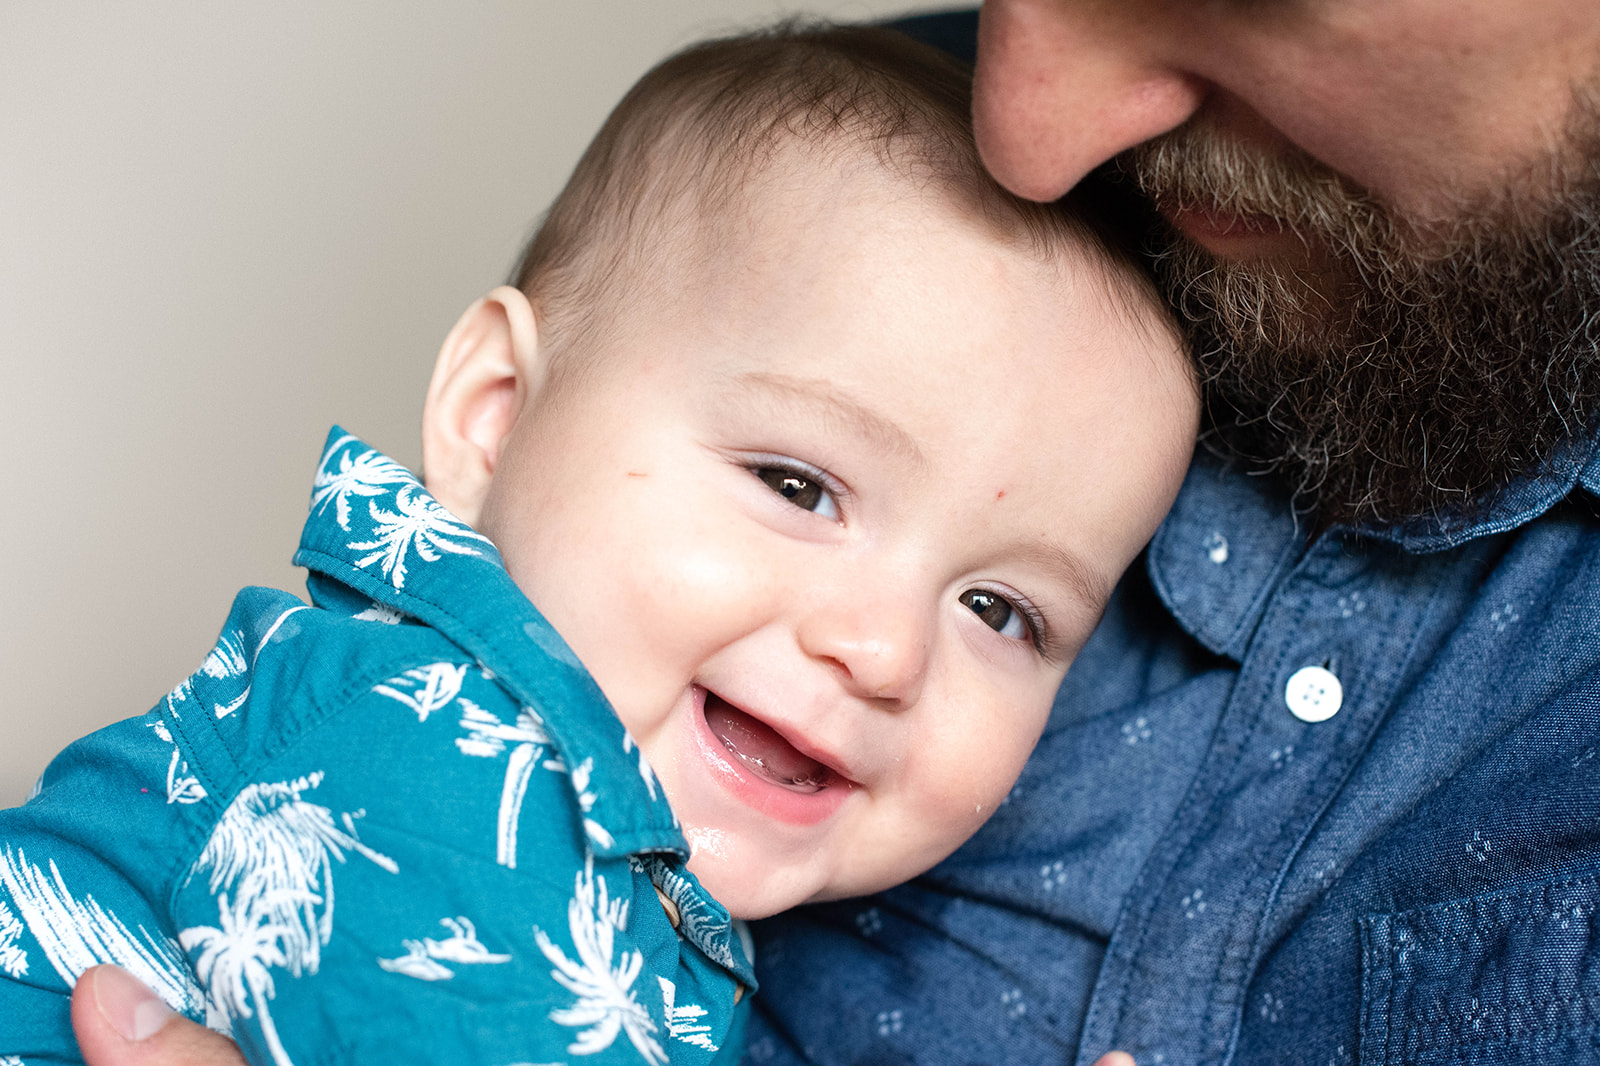 A baby being held by his dad during a Chicago family photography session